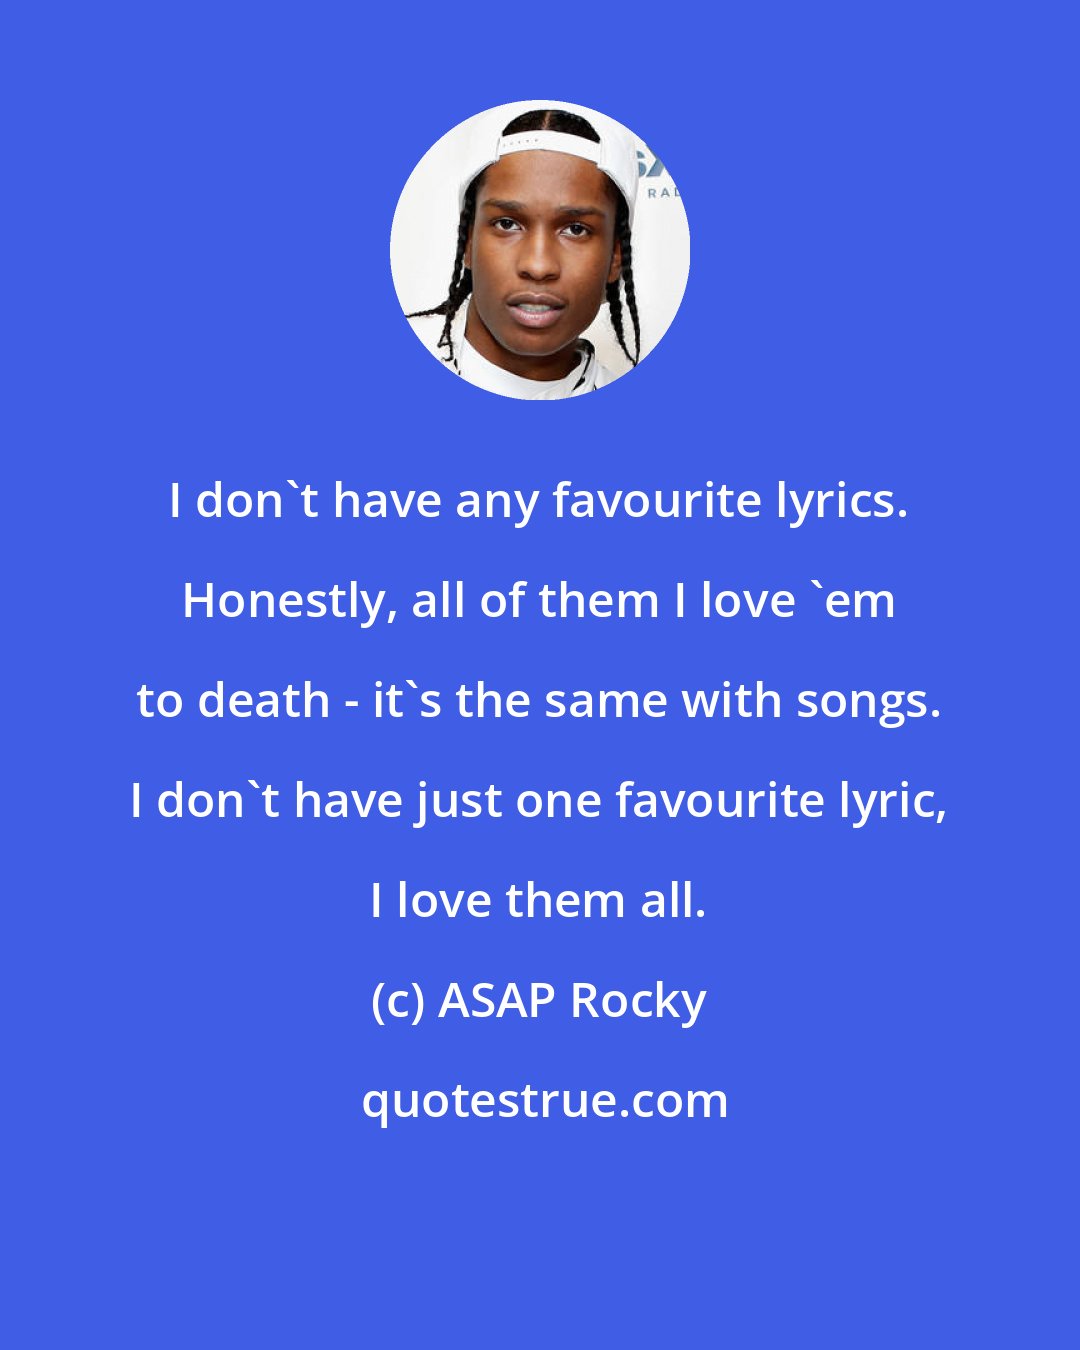 ASAP Rocky: I don't have any favourite lyrics. Honestly, all of them I love 'em to death - it's the same with songs. I don't have just one favourite lyric, I love them all.